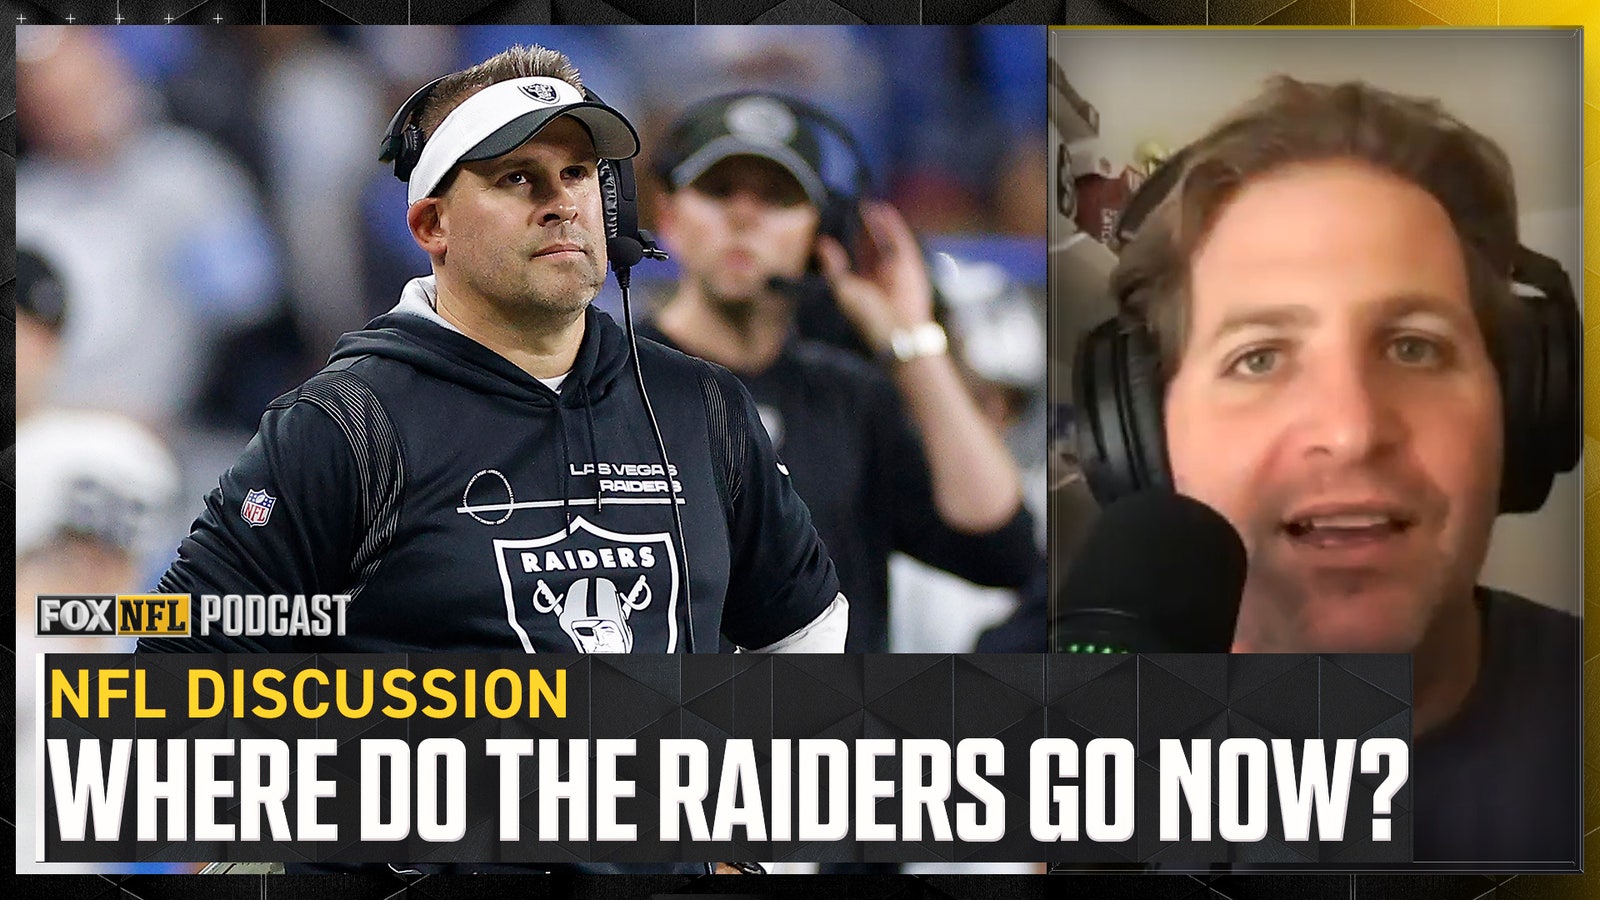 What's next for the Raiders after firing their coach and GM?